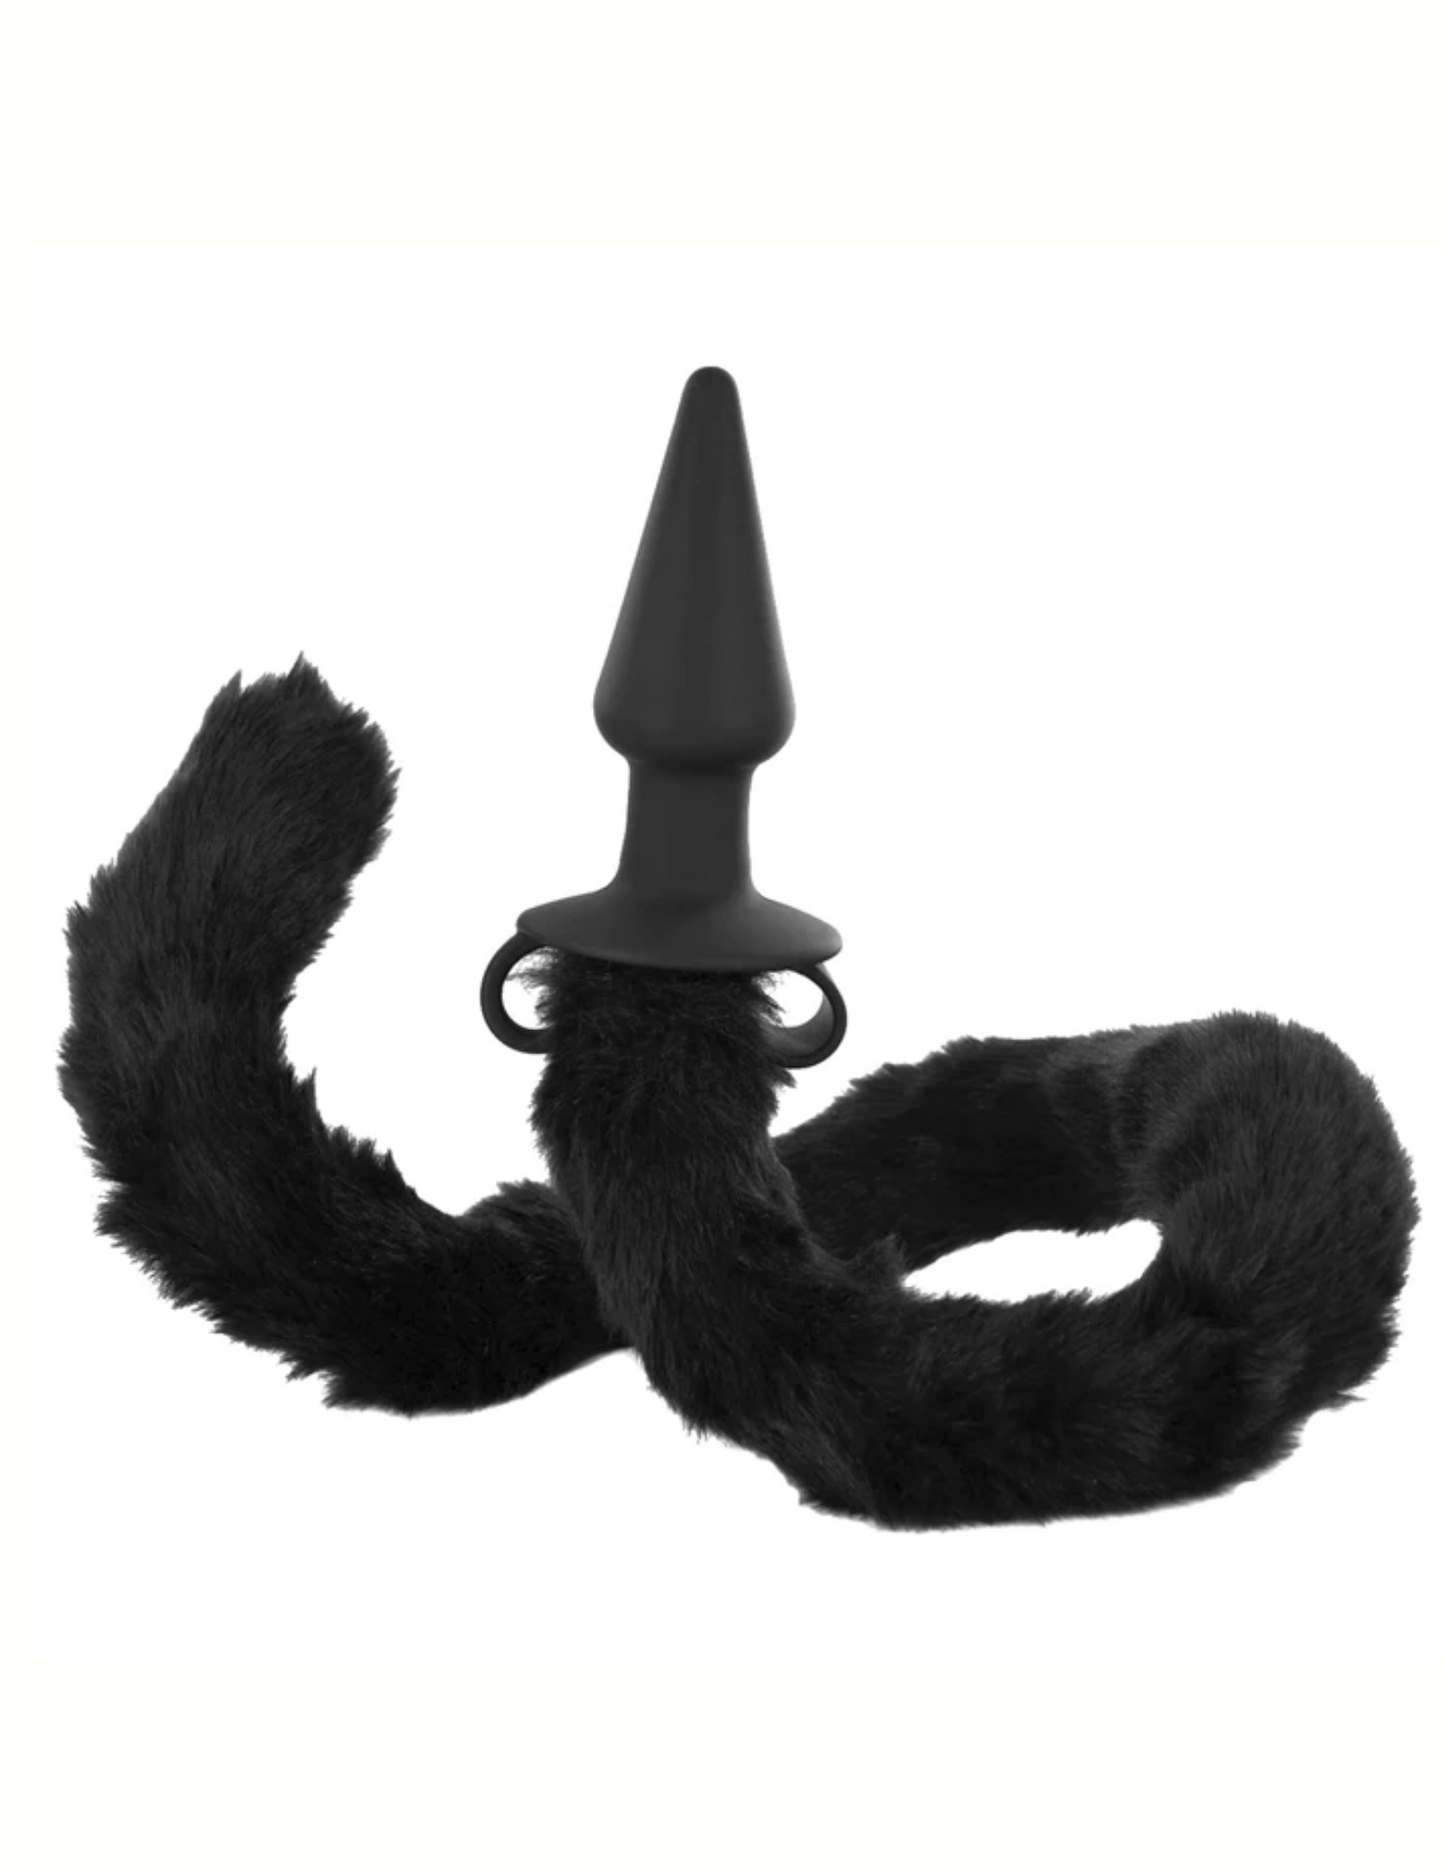 Close-up of the plug portion of the Bad Kitty Tail from XR Brands (black).